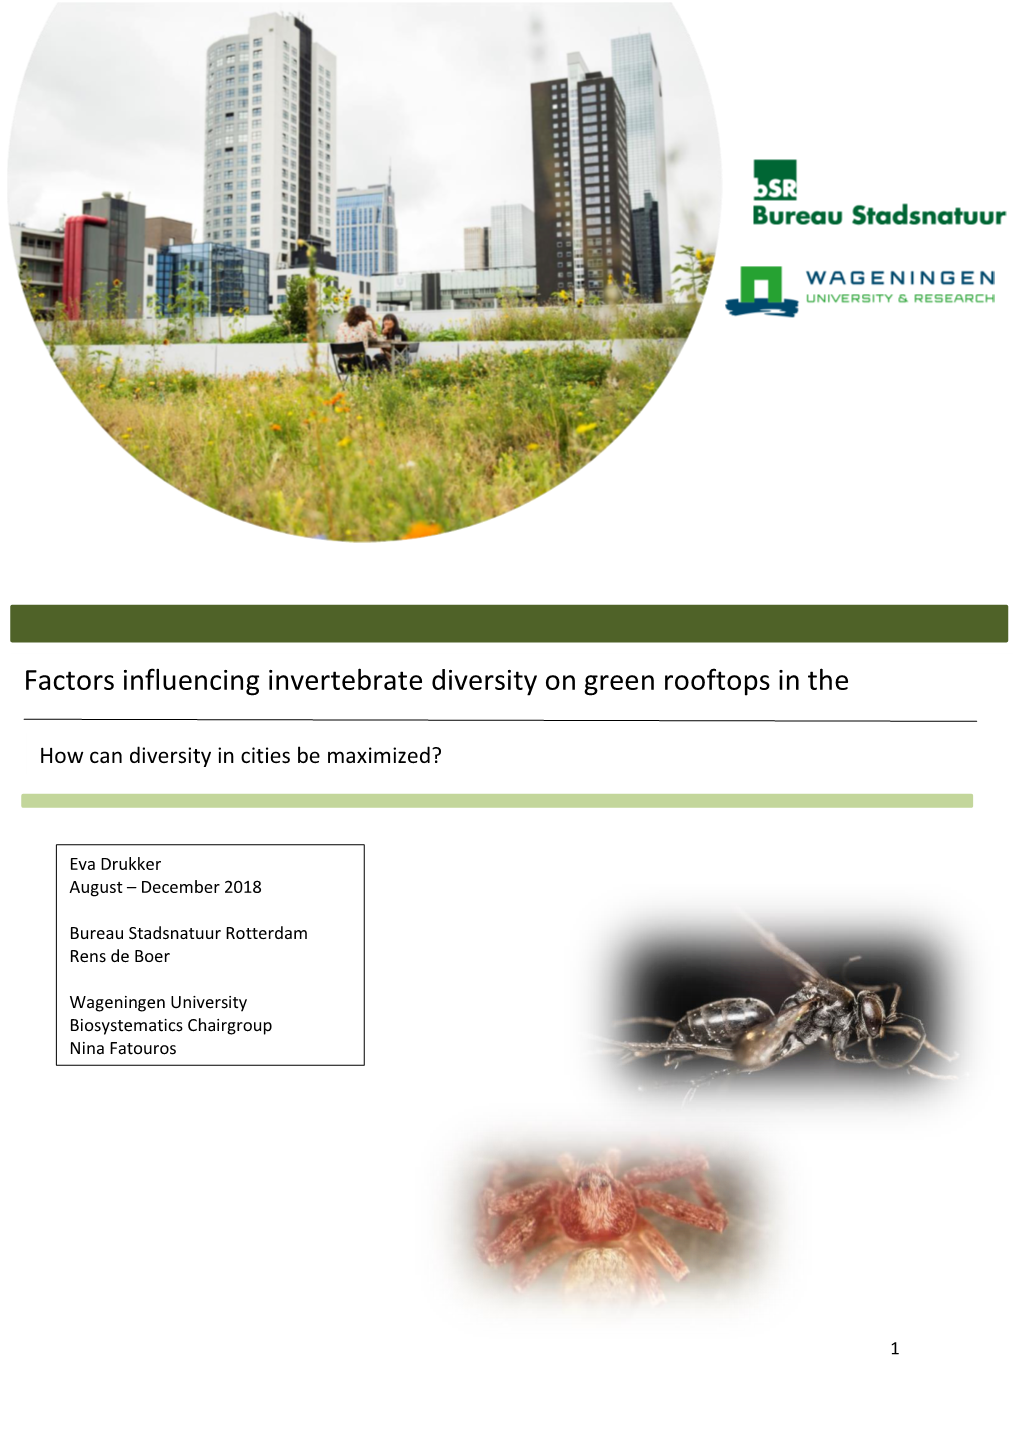 Factors Influencing Invertebrate Diversity on Green Rooftops in the Netherlands How Can Diversity in Cities Be Maximized?